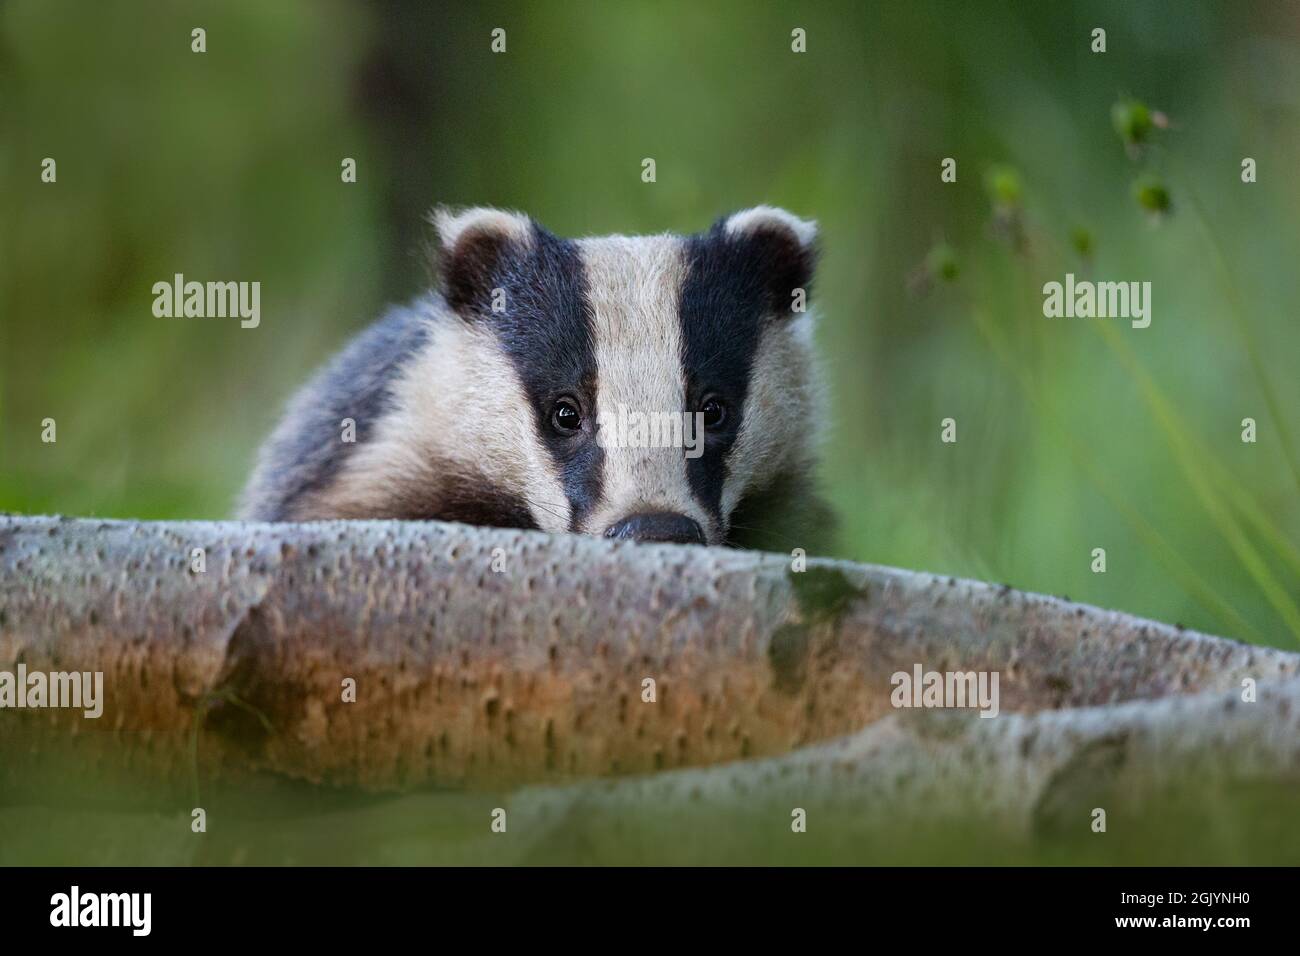 Badger foraging for food the woodland. Stock Photo